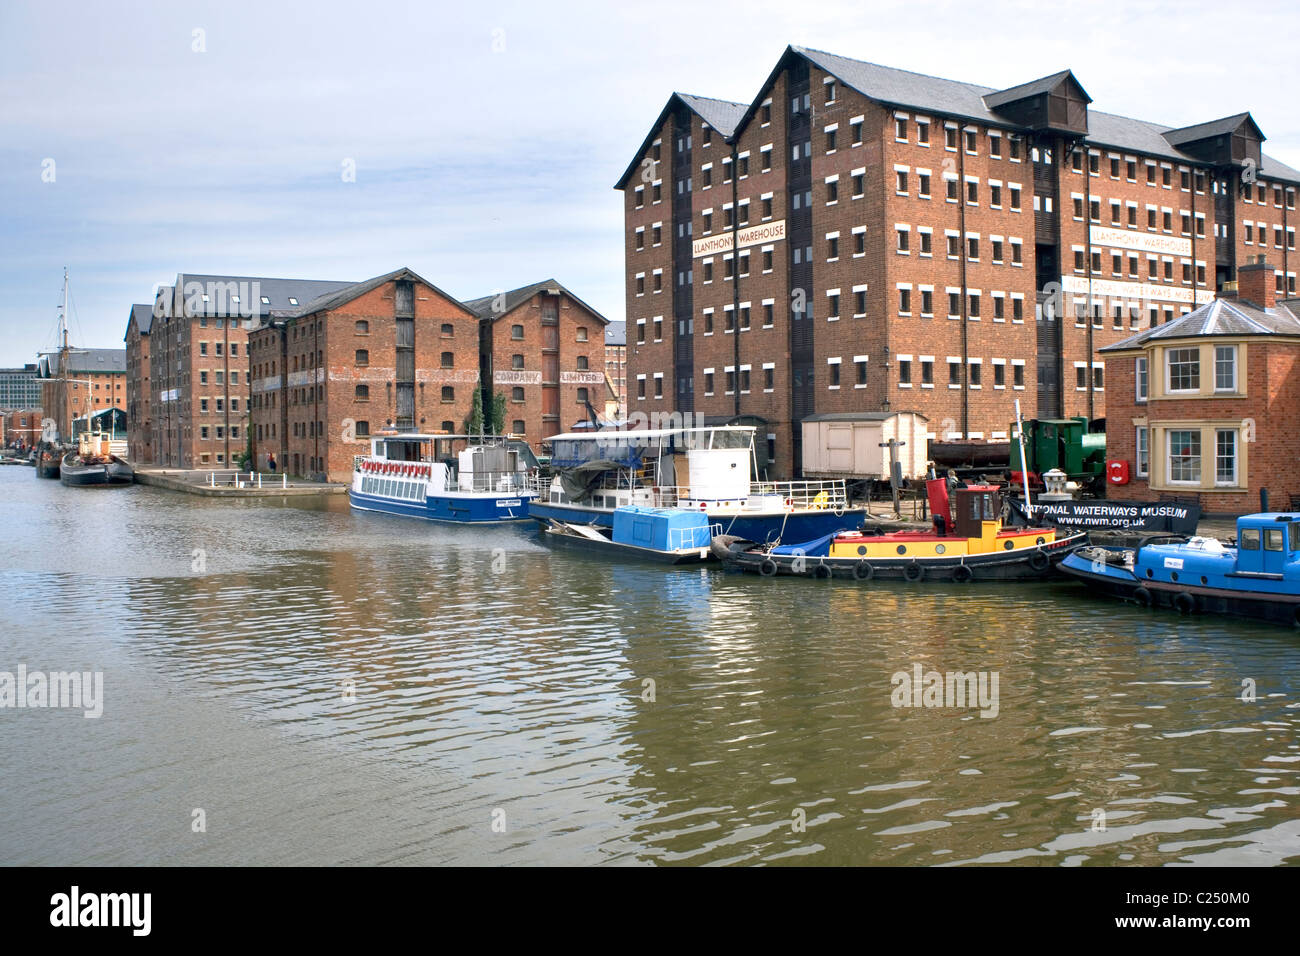 Waterways Museum in ex docks, Gloucester, Gloucestershire, Severn Vale, England, Regno Unito, Europa Foto Stock